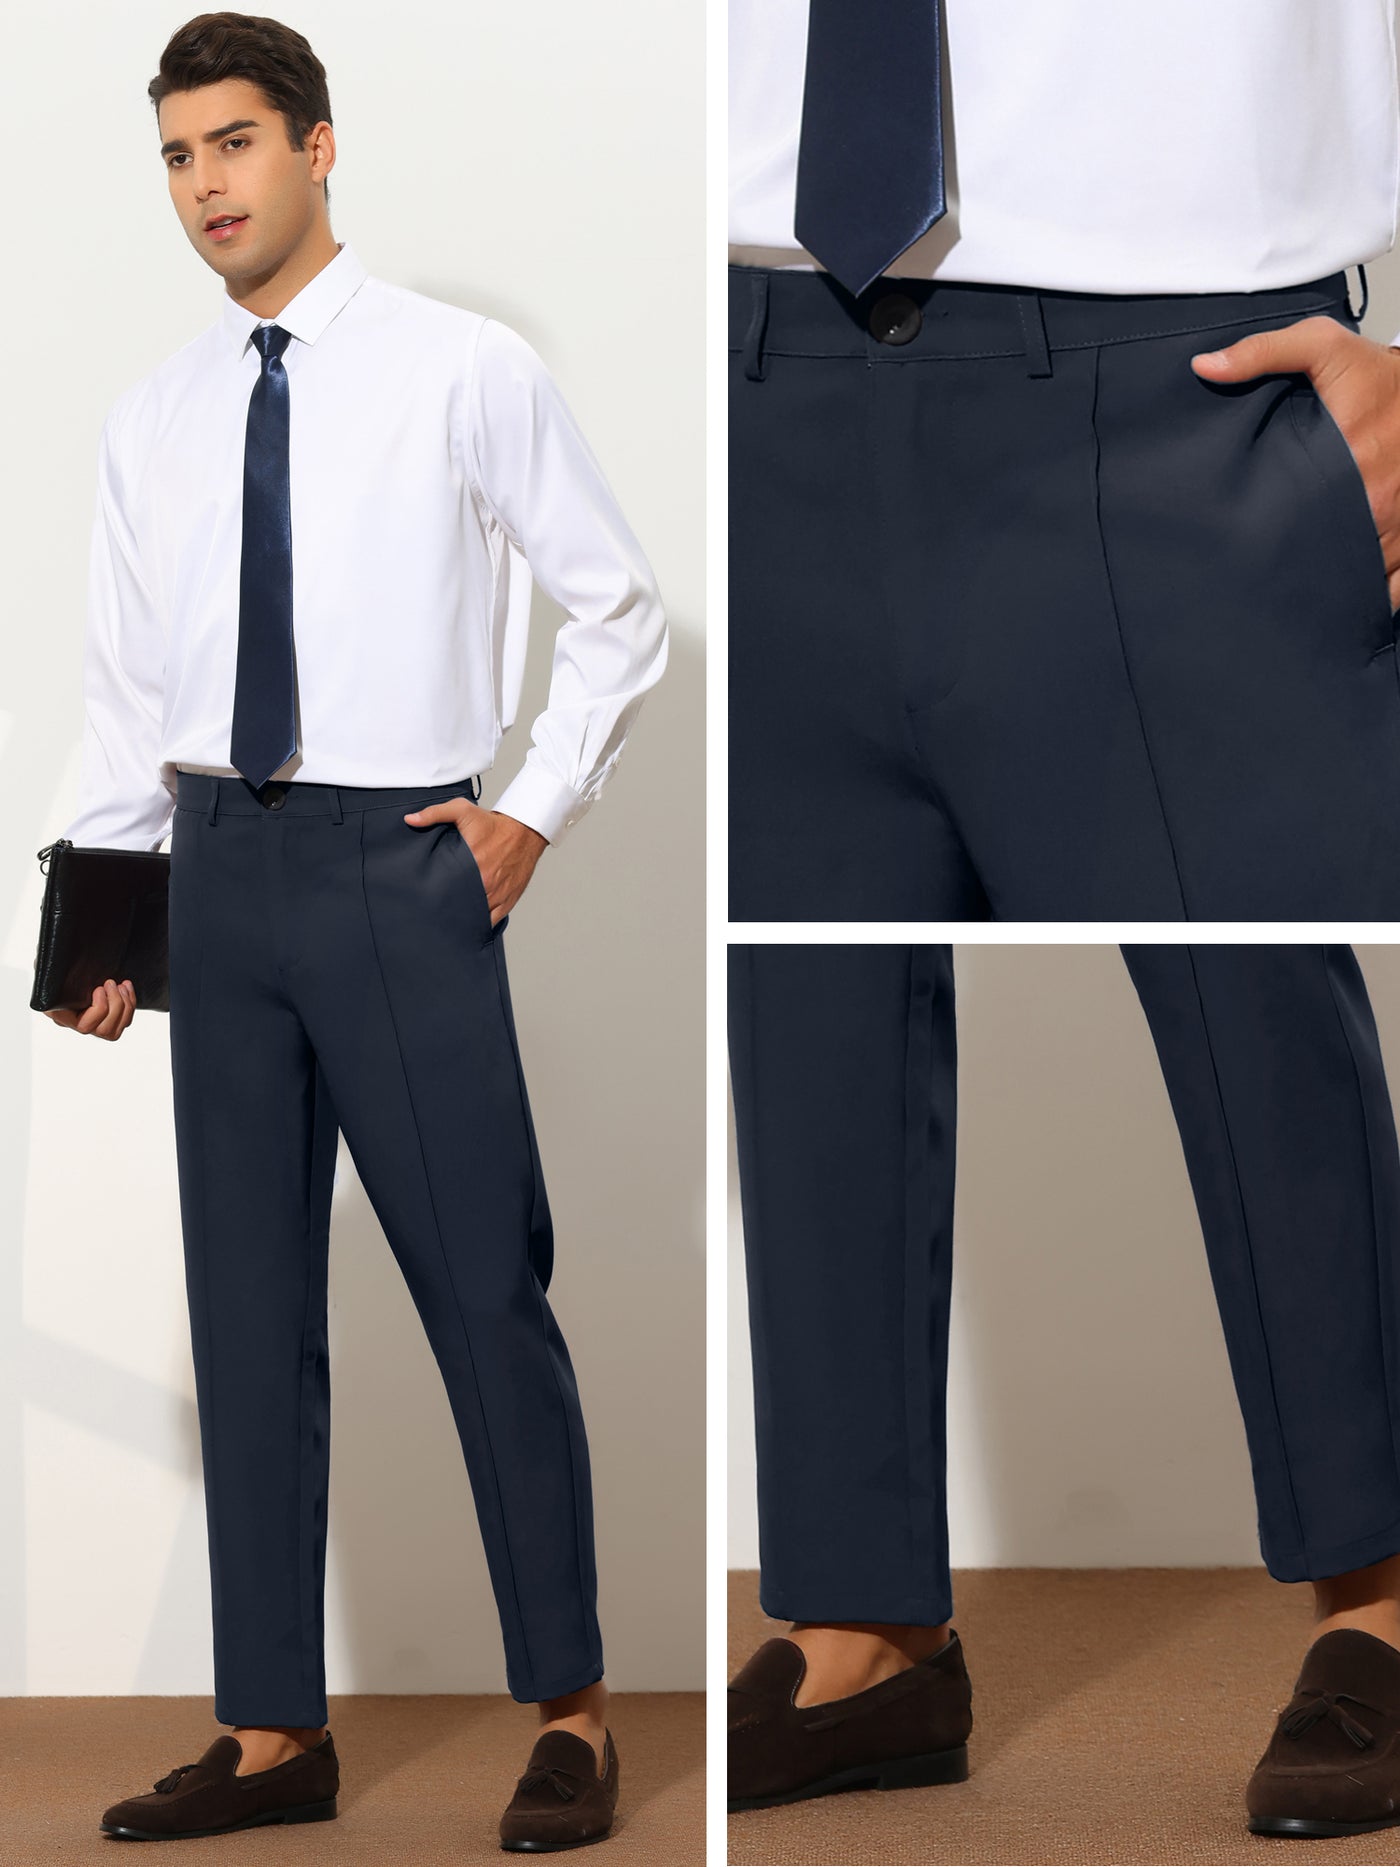 Bublédon Dress Pants for Men's Tapered Solid Color Slim Fit Pleated Front Trousers